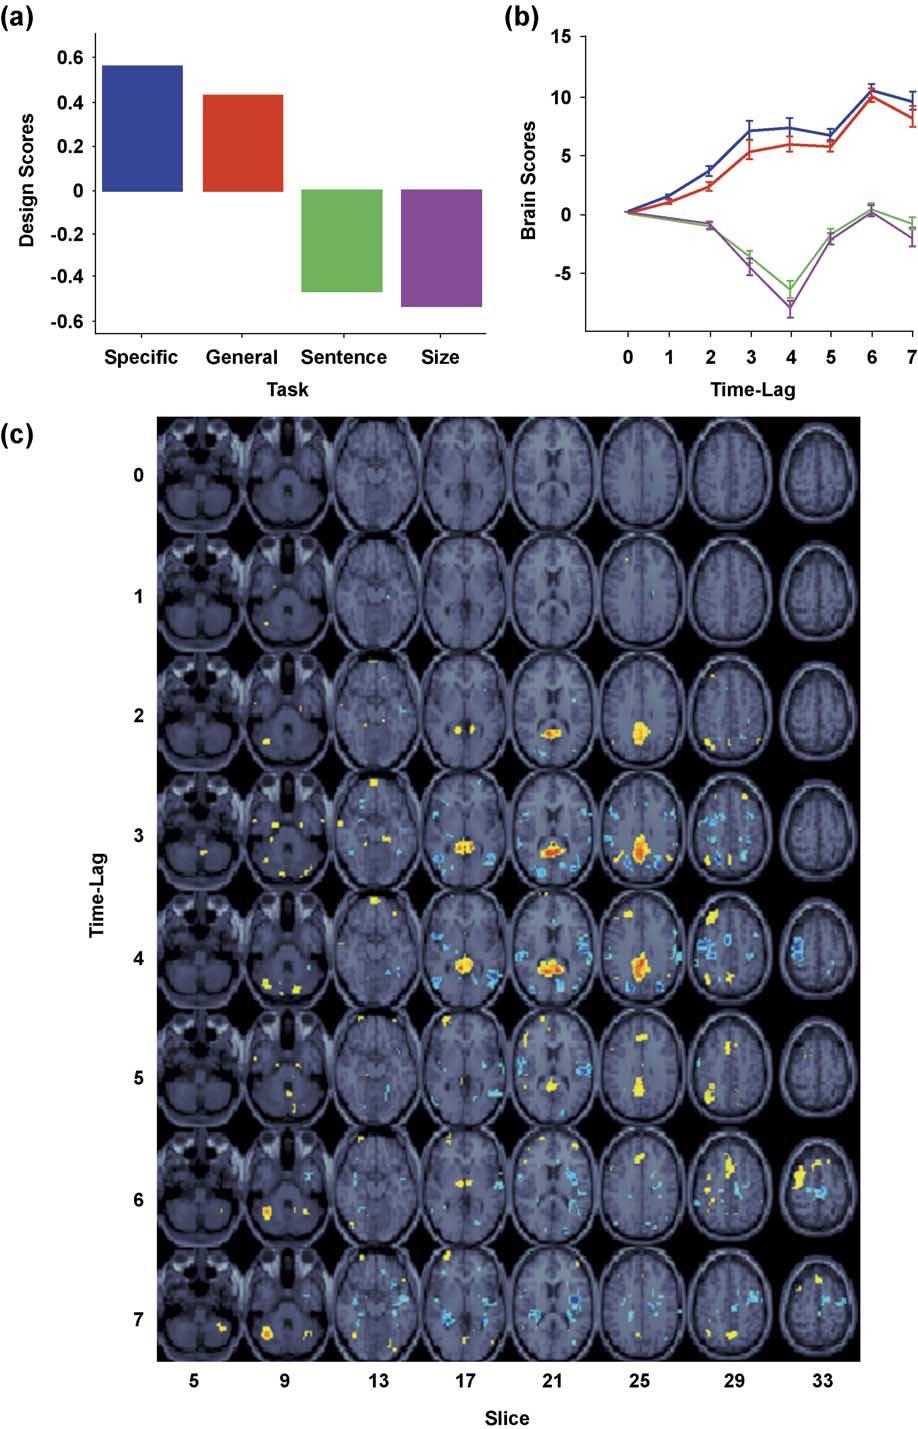 1464 D.R. Addis et al. / NeuroImage 23 (2004) 1460 1471 Fig. 1. (a) This graph corresponds to scores for the significant latent variable (LV1.